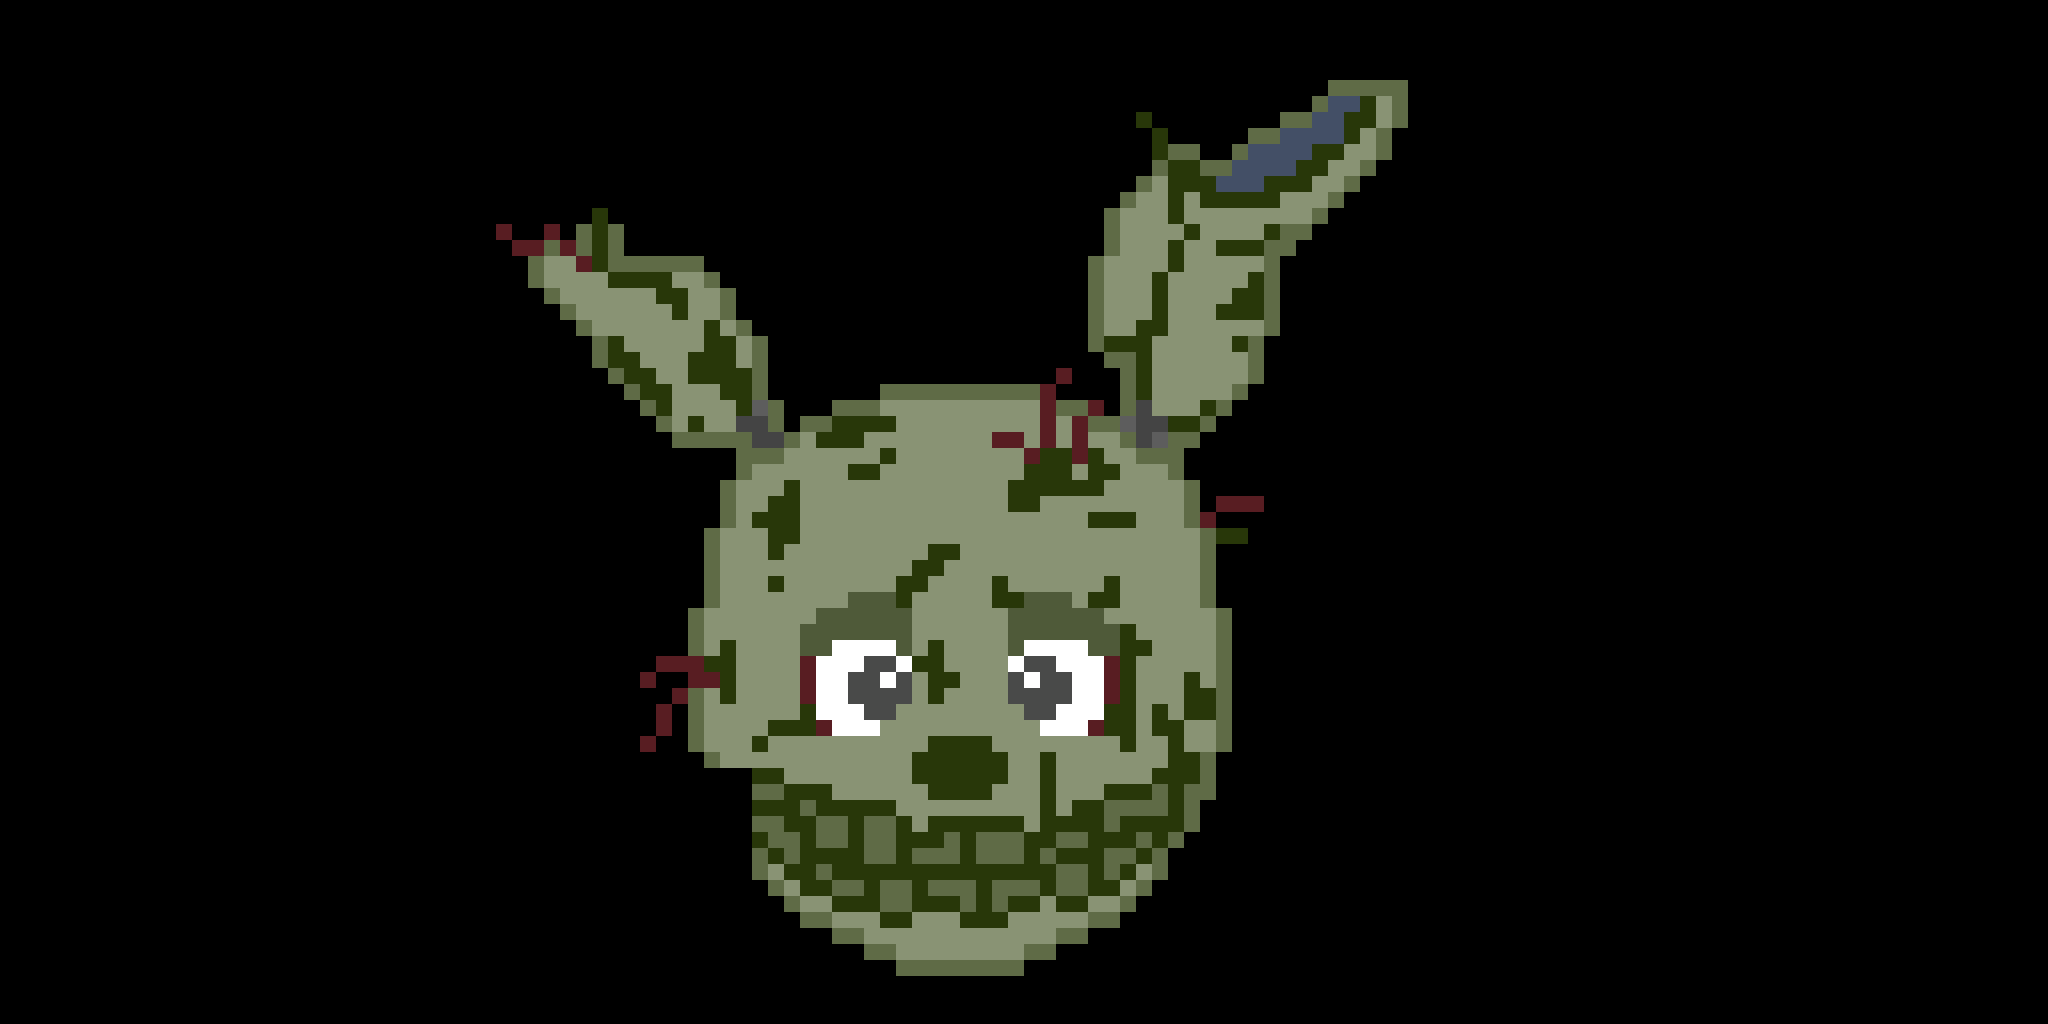 REMAKE OF SPRINGTRAP. Removed the fire, because it made it look weird.